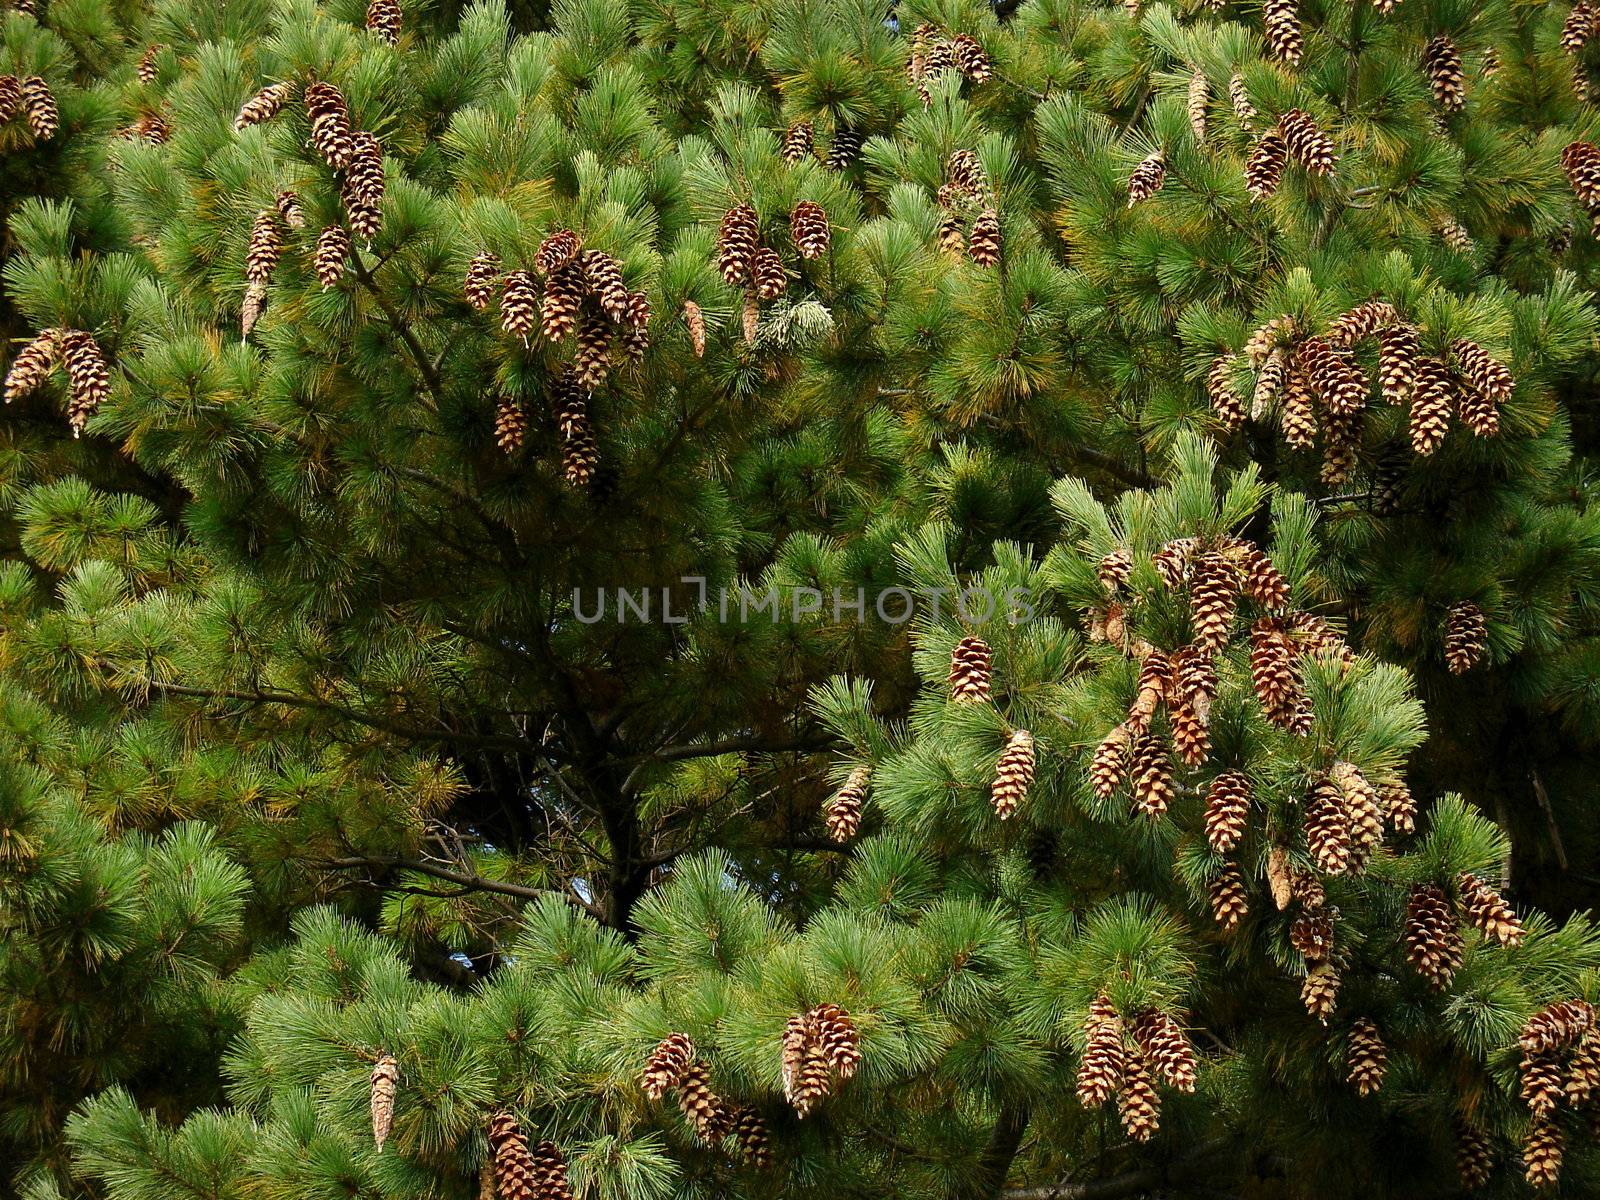 Pine tree by tomatto